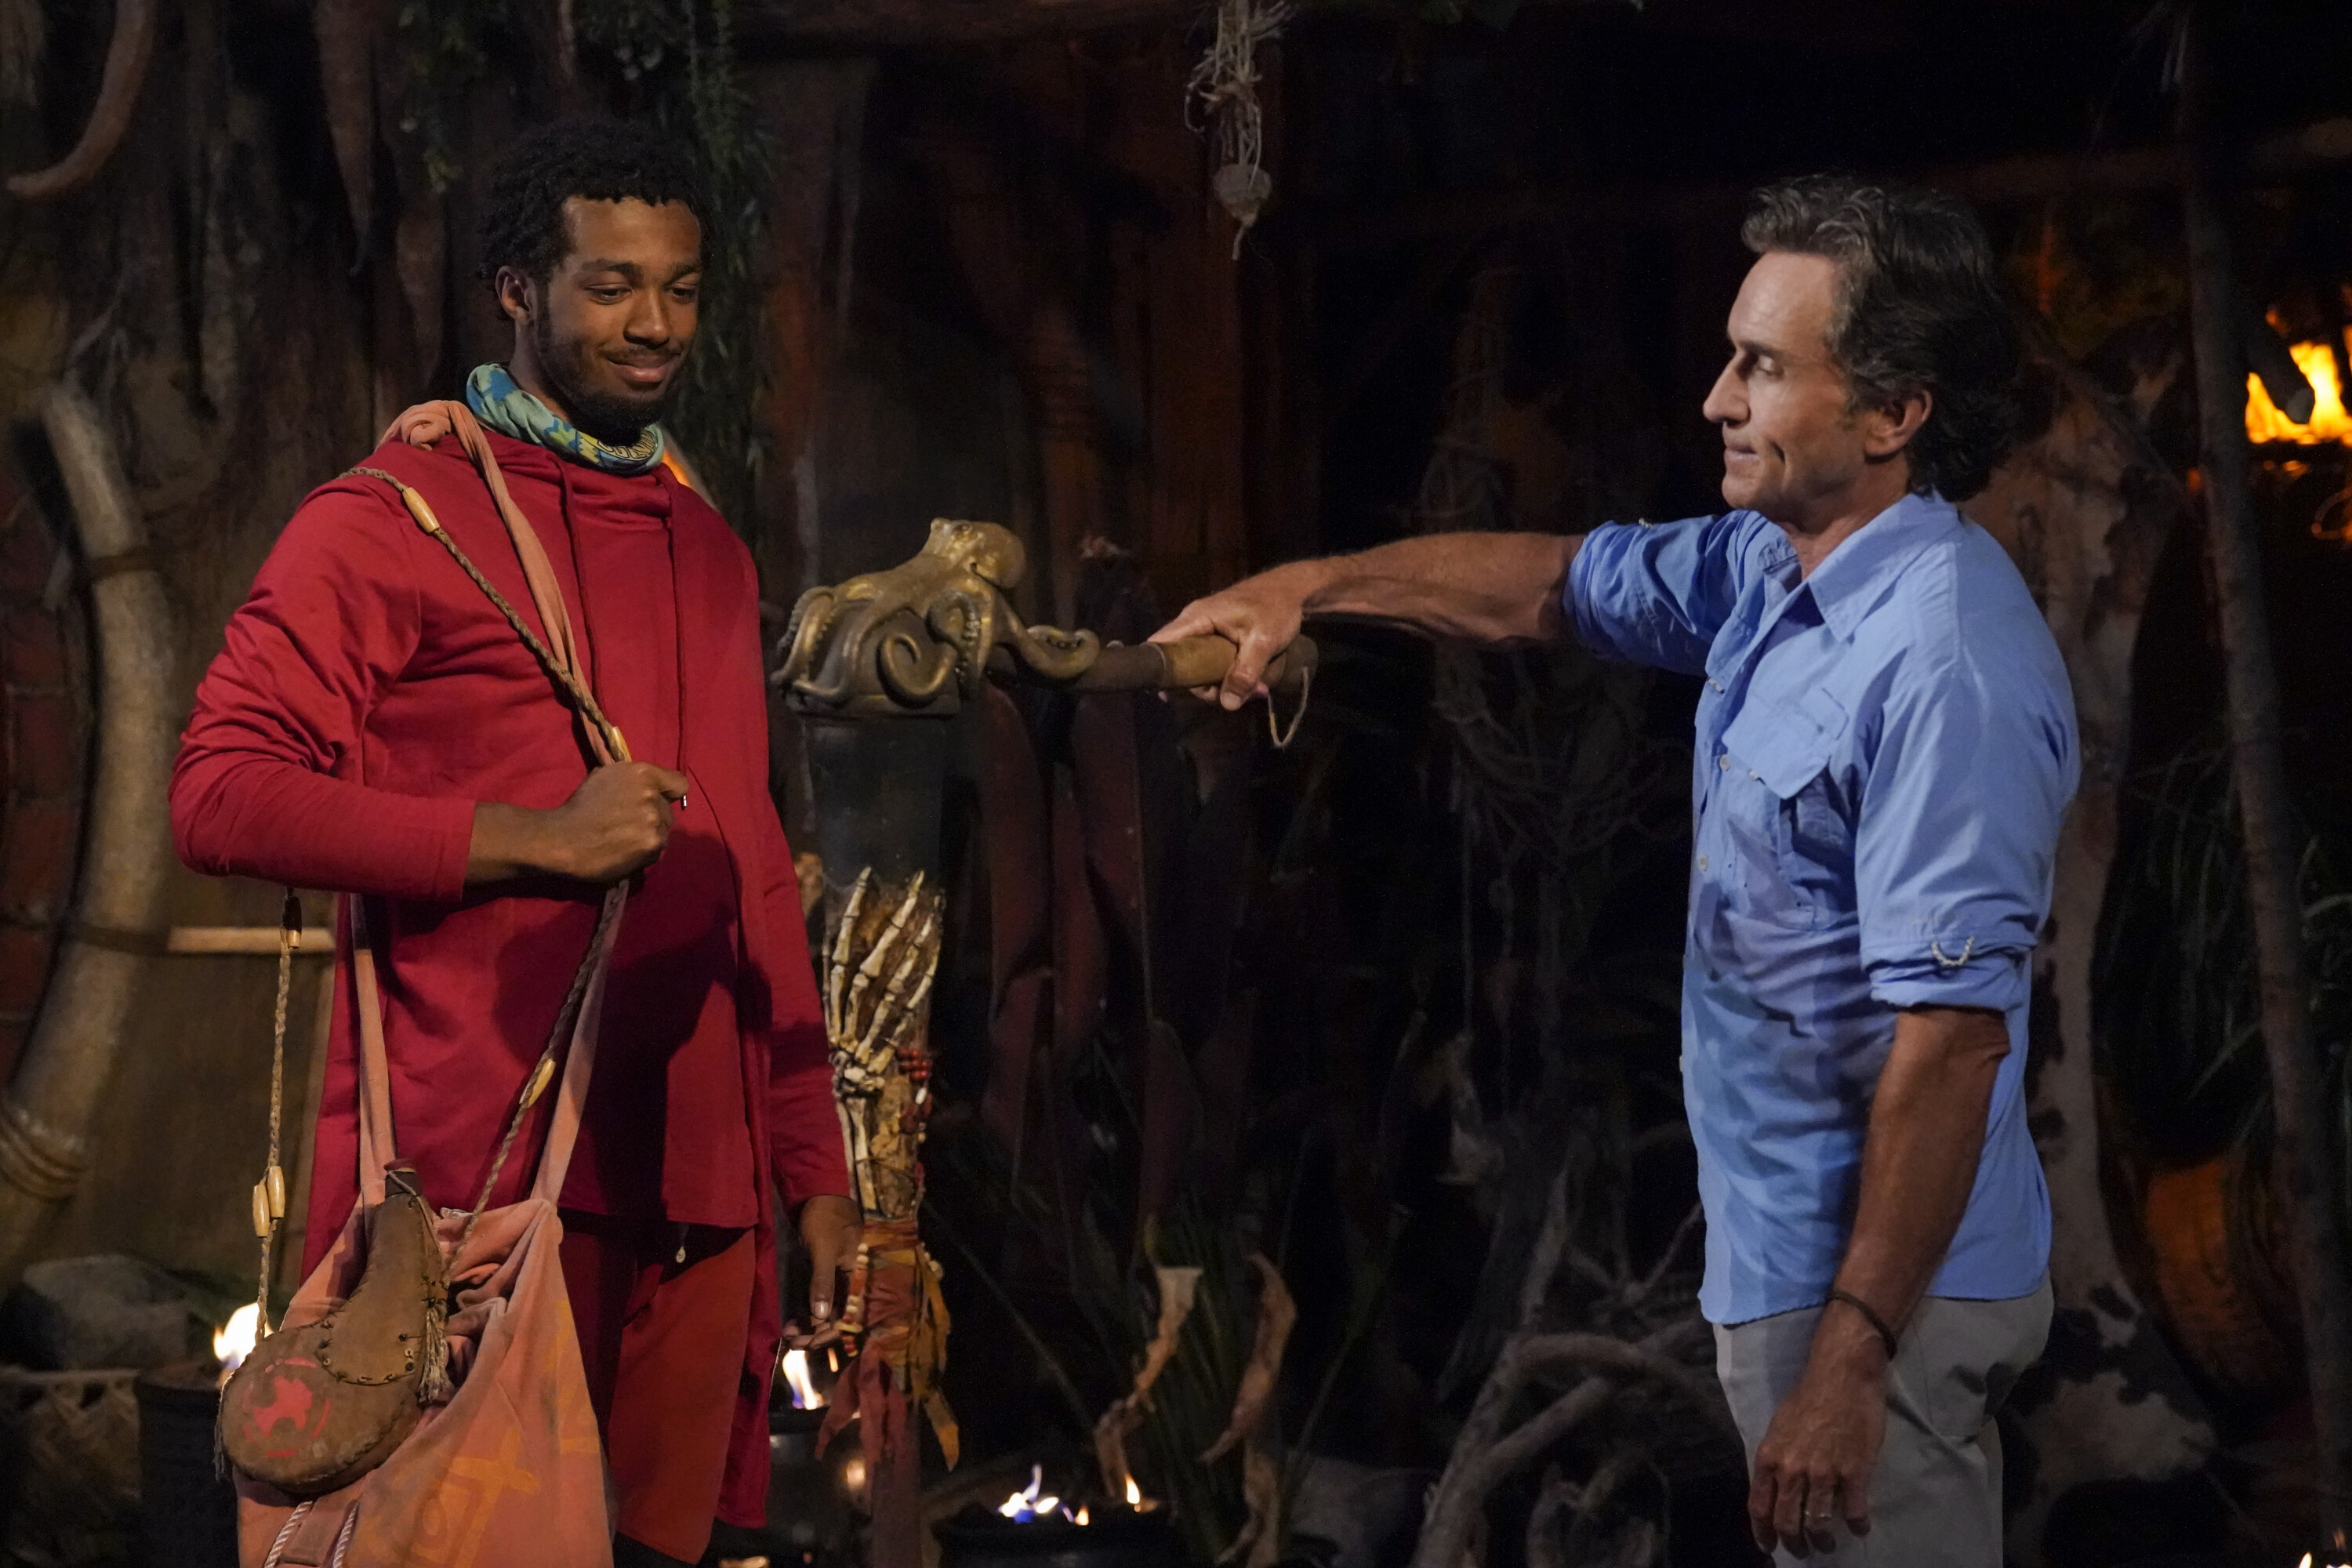 Dwight Moore and Jeff Probst